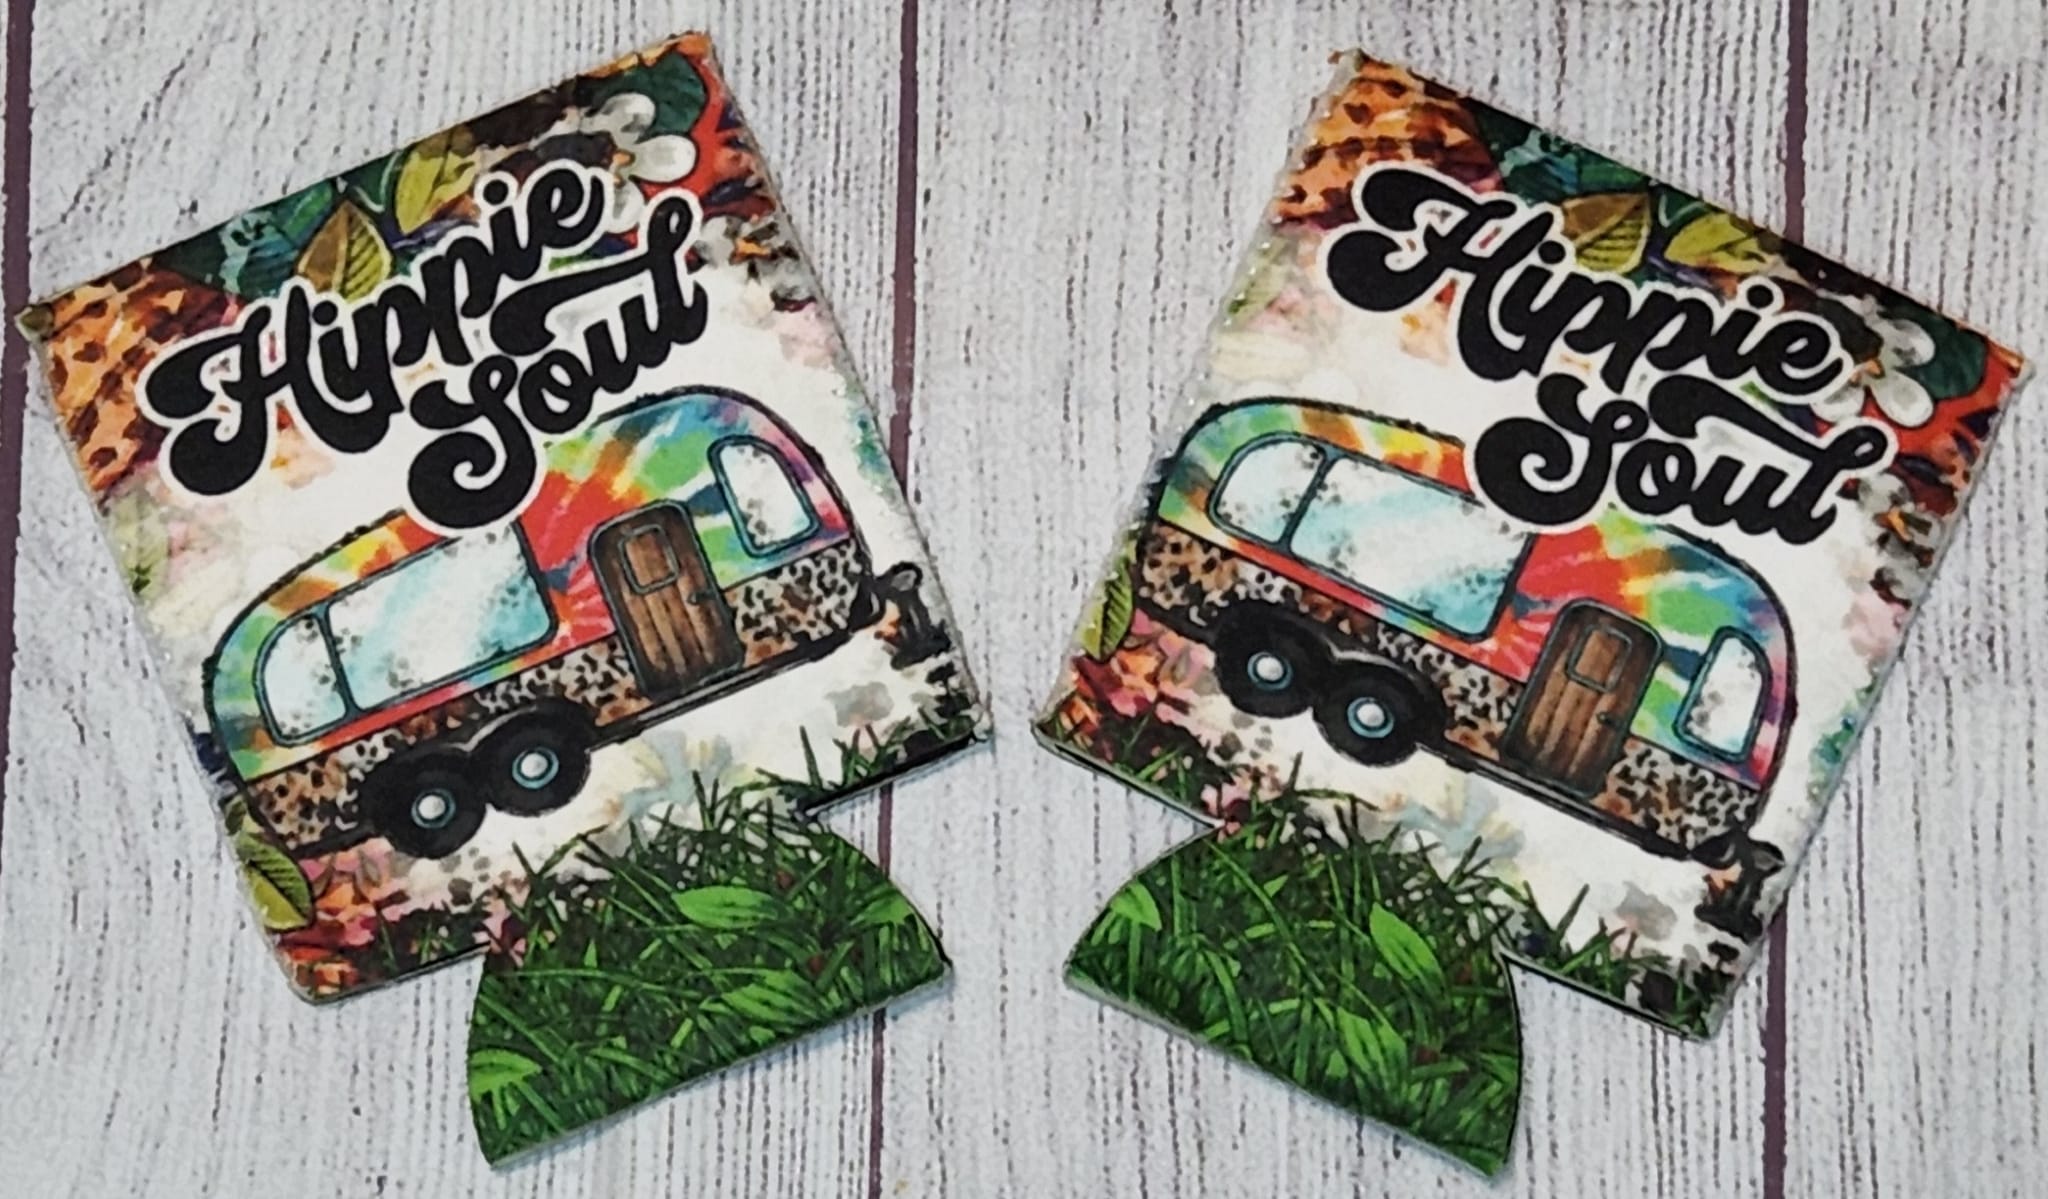 Hippie Soul koozie made with sublimation printing